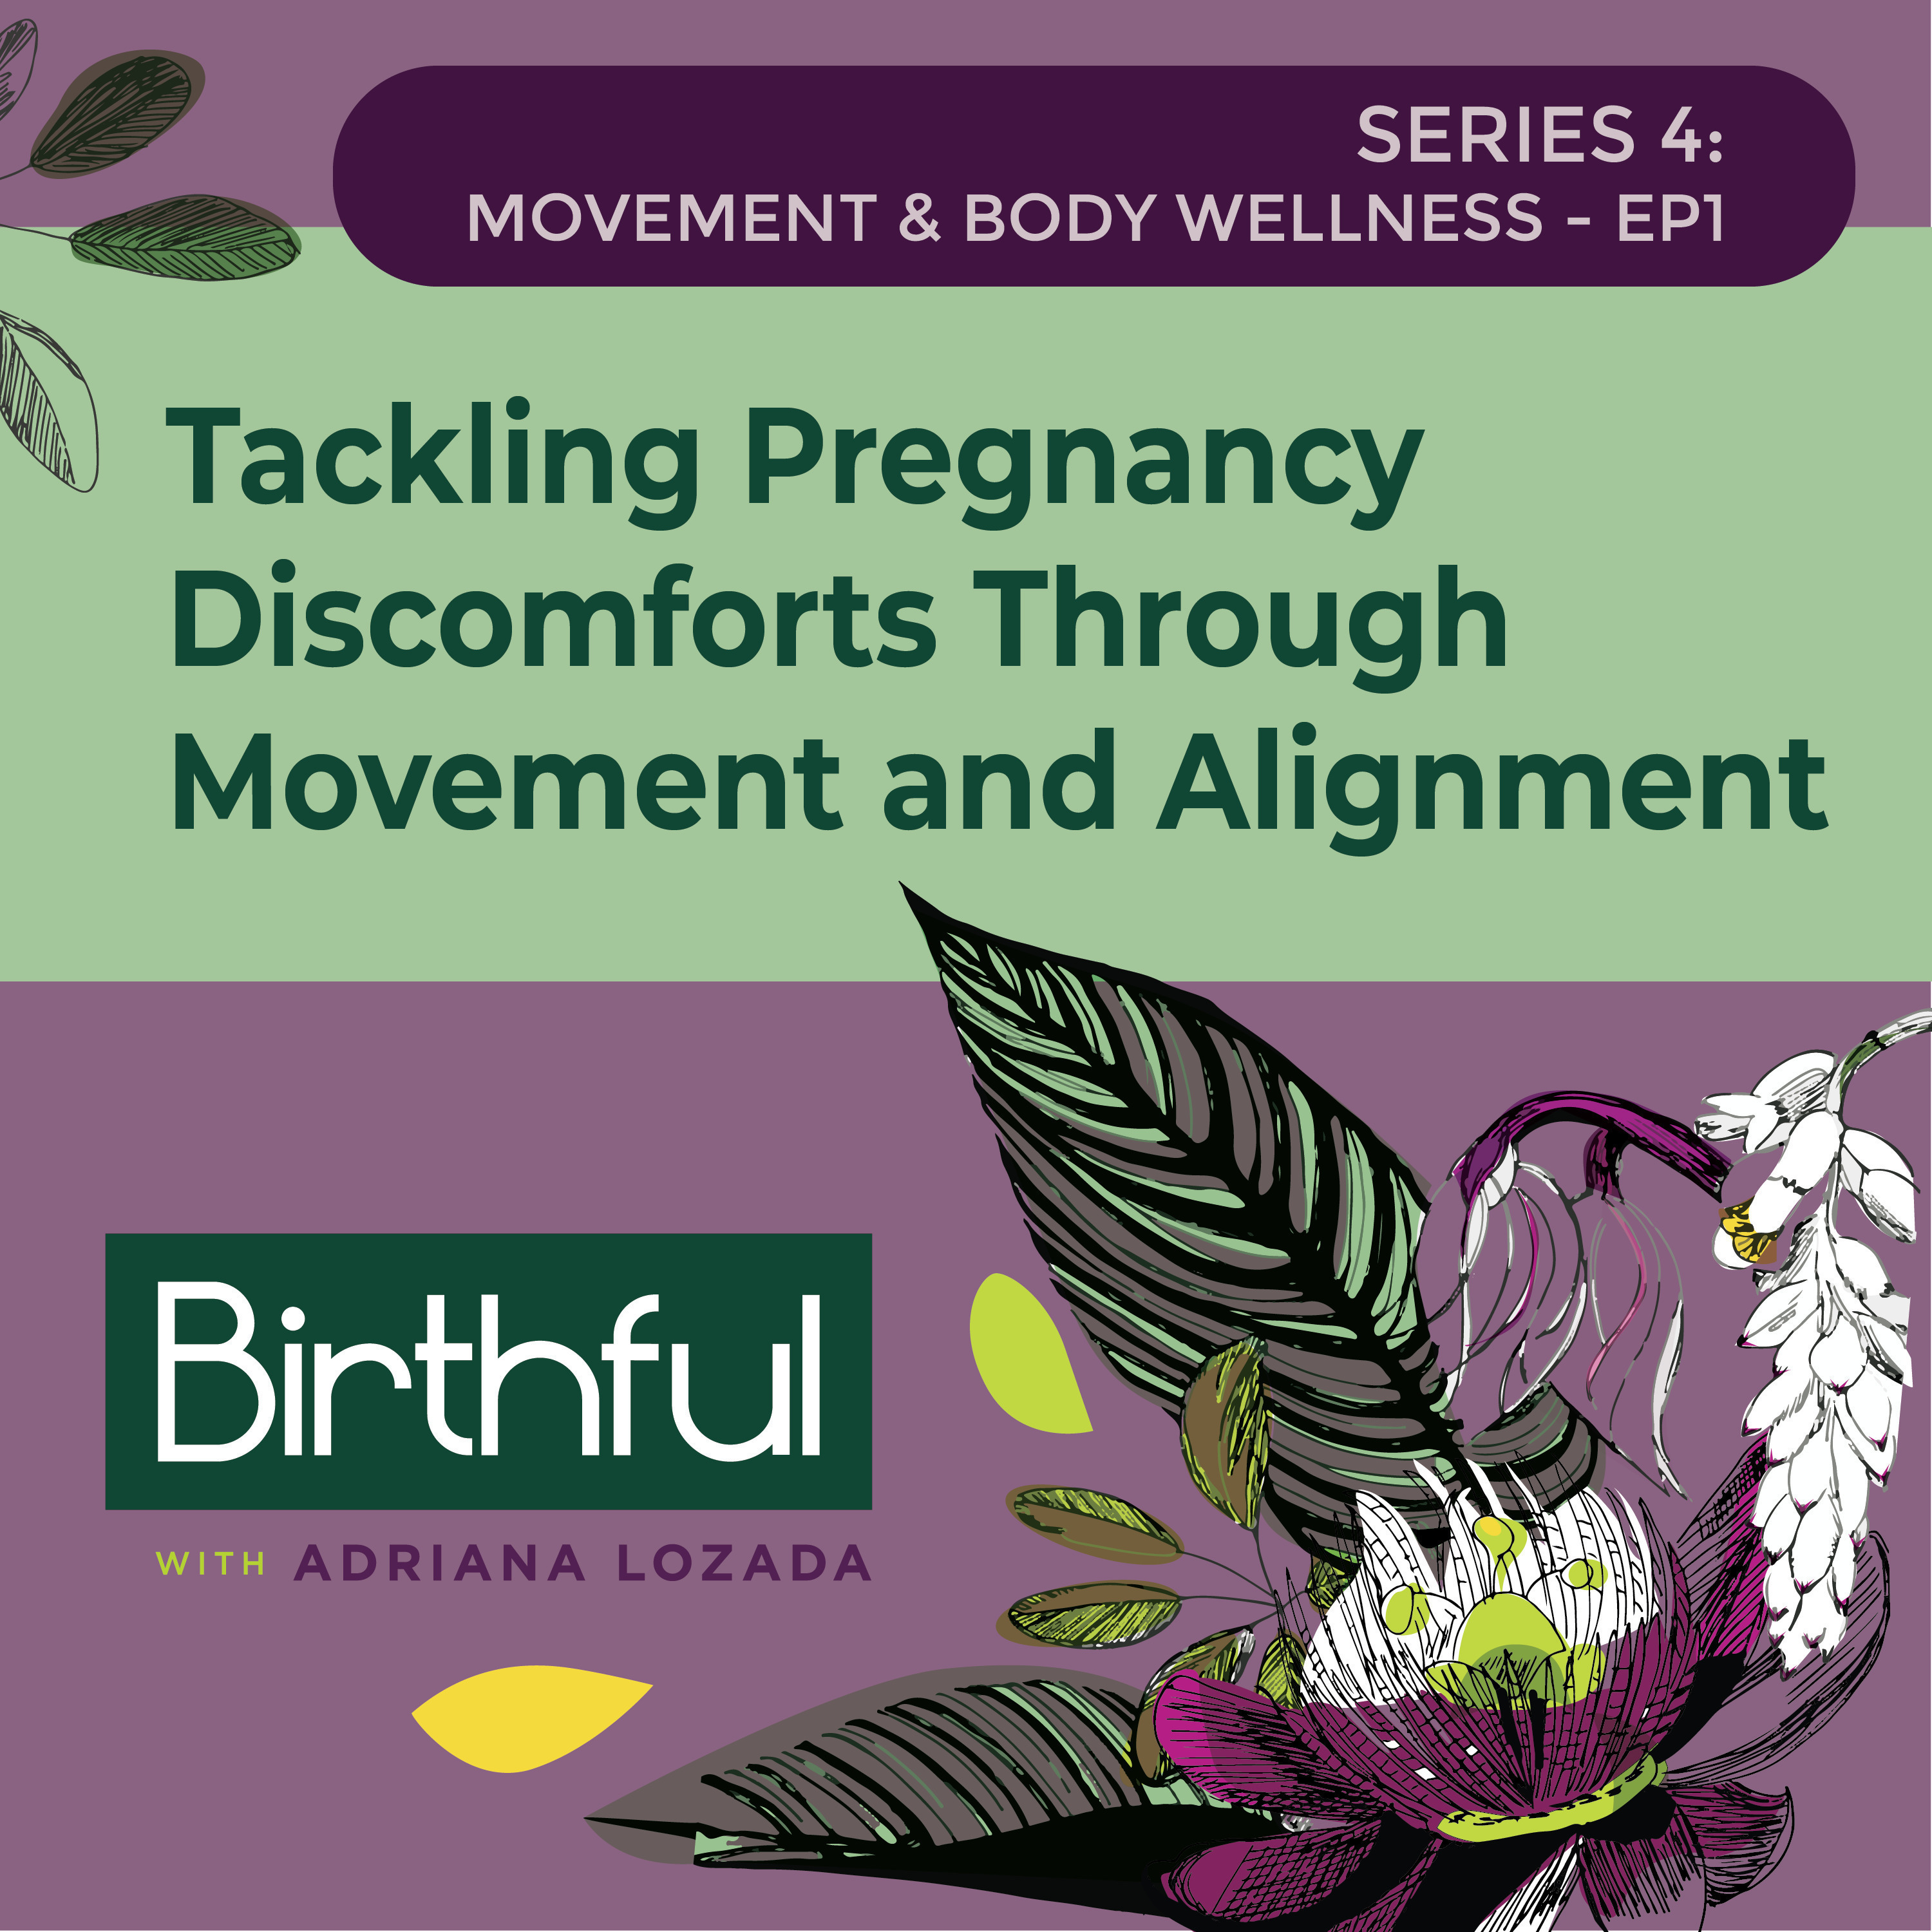 Tackling Pregnancy Discomforts Through Movement and Alignment